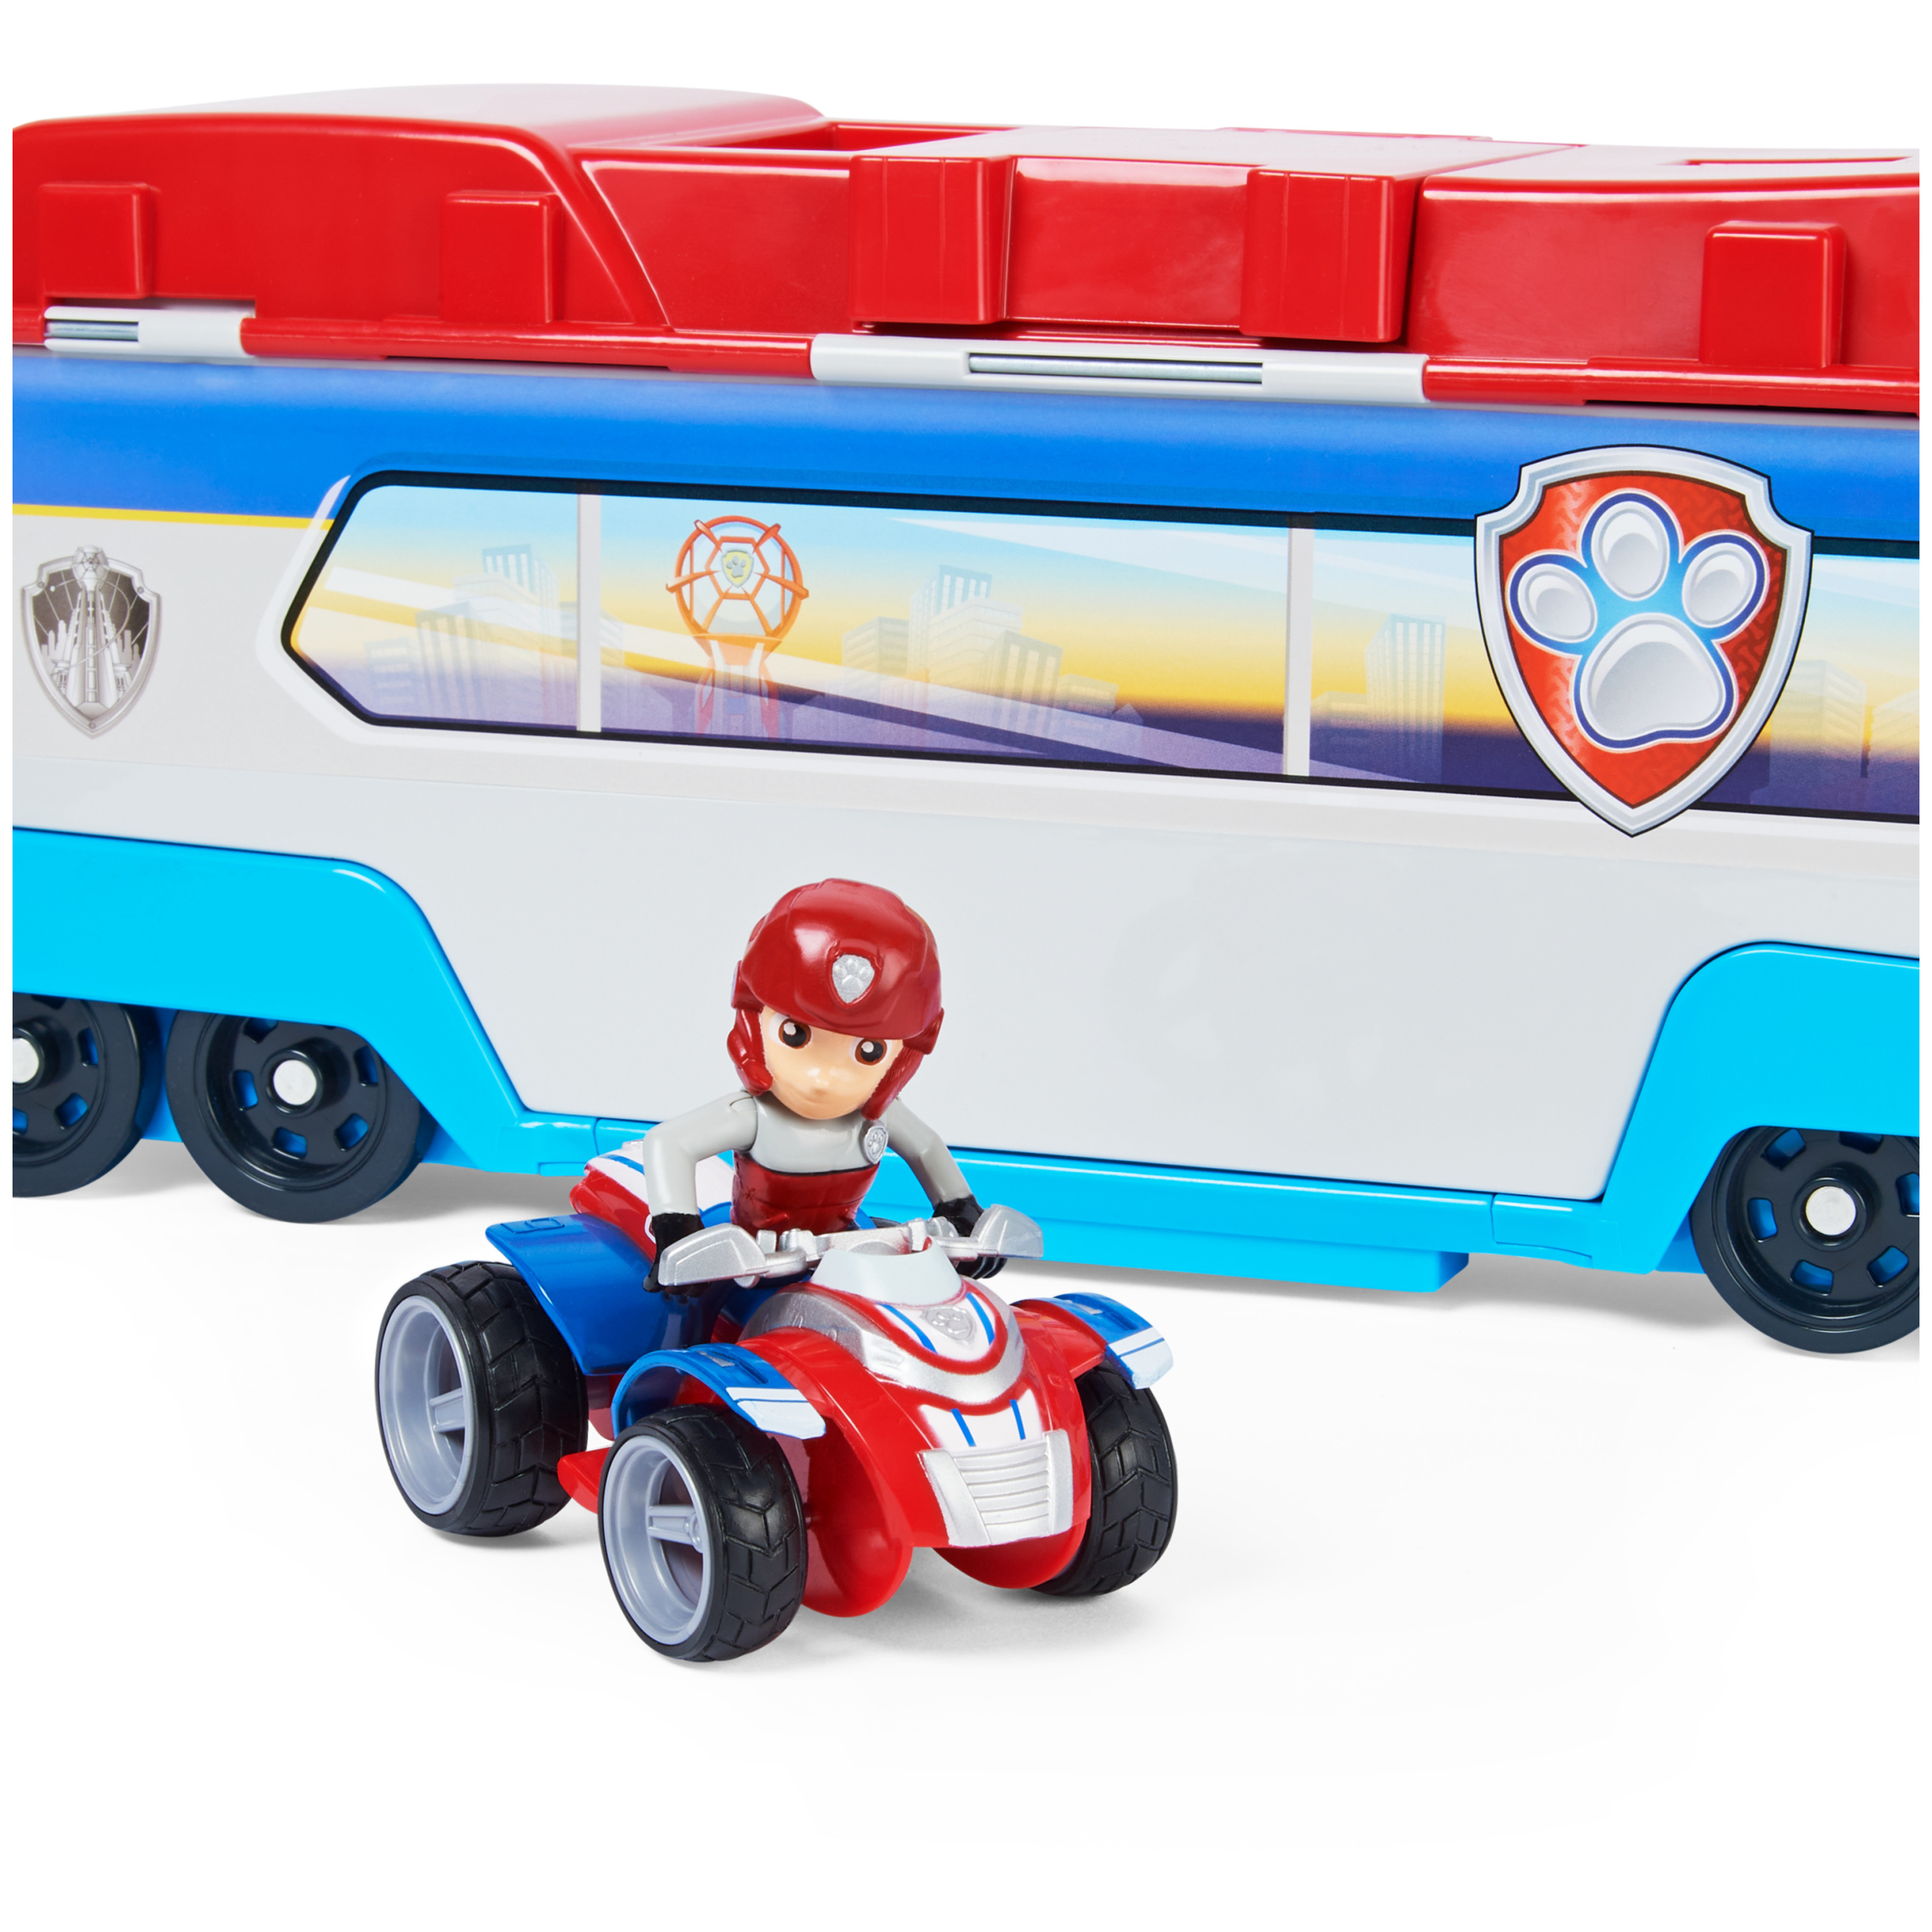 PAW Patrol, Transforming City PAW Patroller Vehicle (Walmart Exclusive), for Ages 3 and up - image 5 of 8